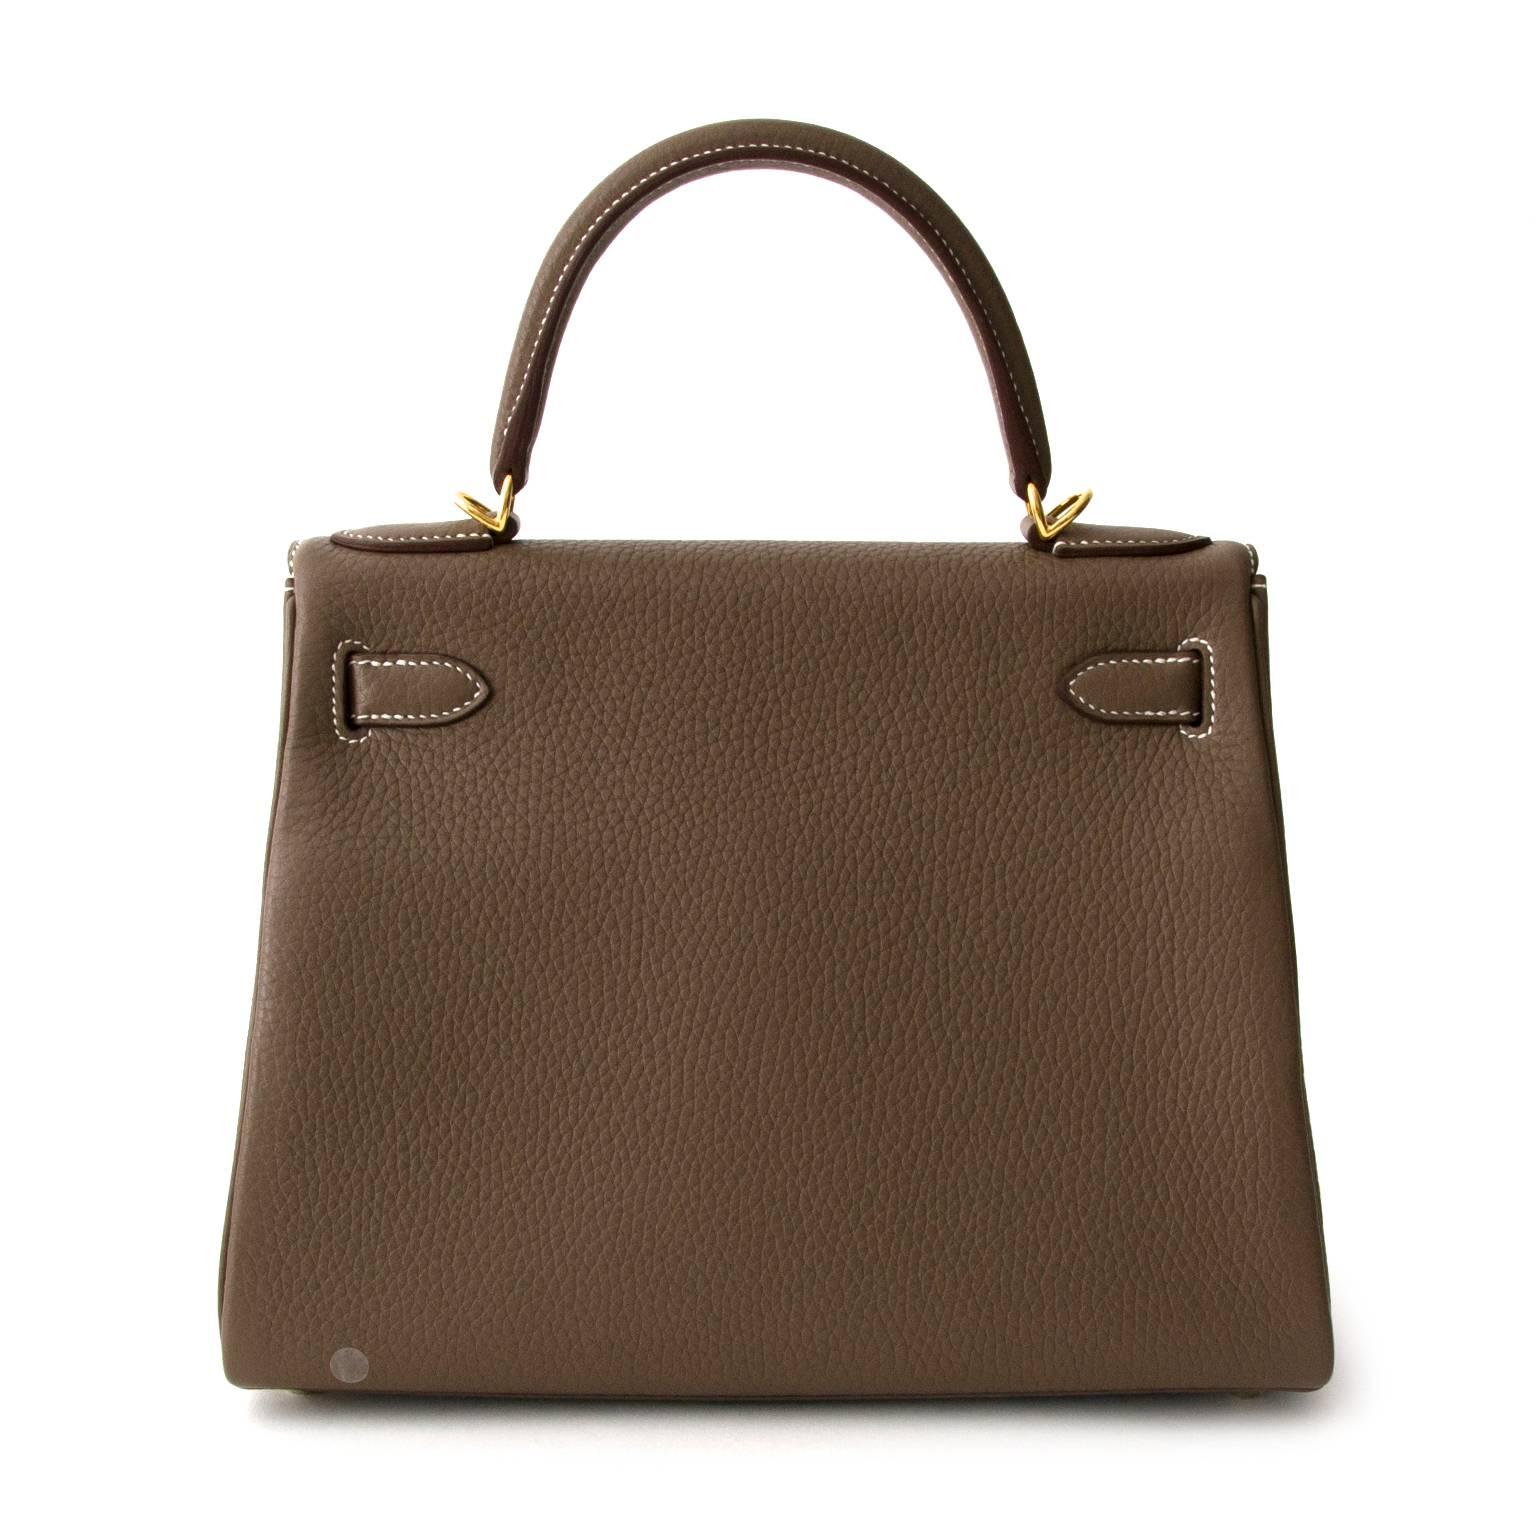 Brand New Hermès Kelly Retourne 28 Clemence Taurillon
This BRAND NEW Kelly bag is the proof of the craftsmanship of the house of Hermès.
This beauty has never been worn, The protective plastic is still in place on the hardware.

Comes with

